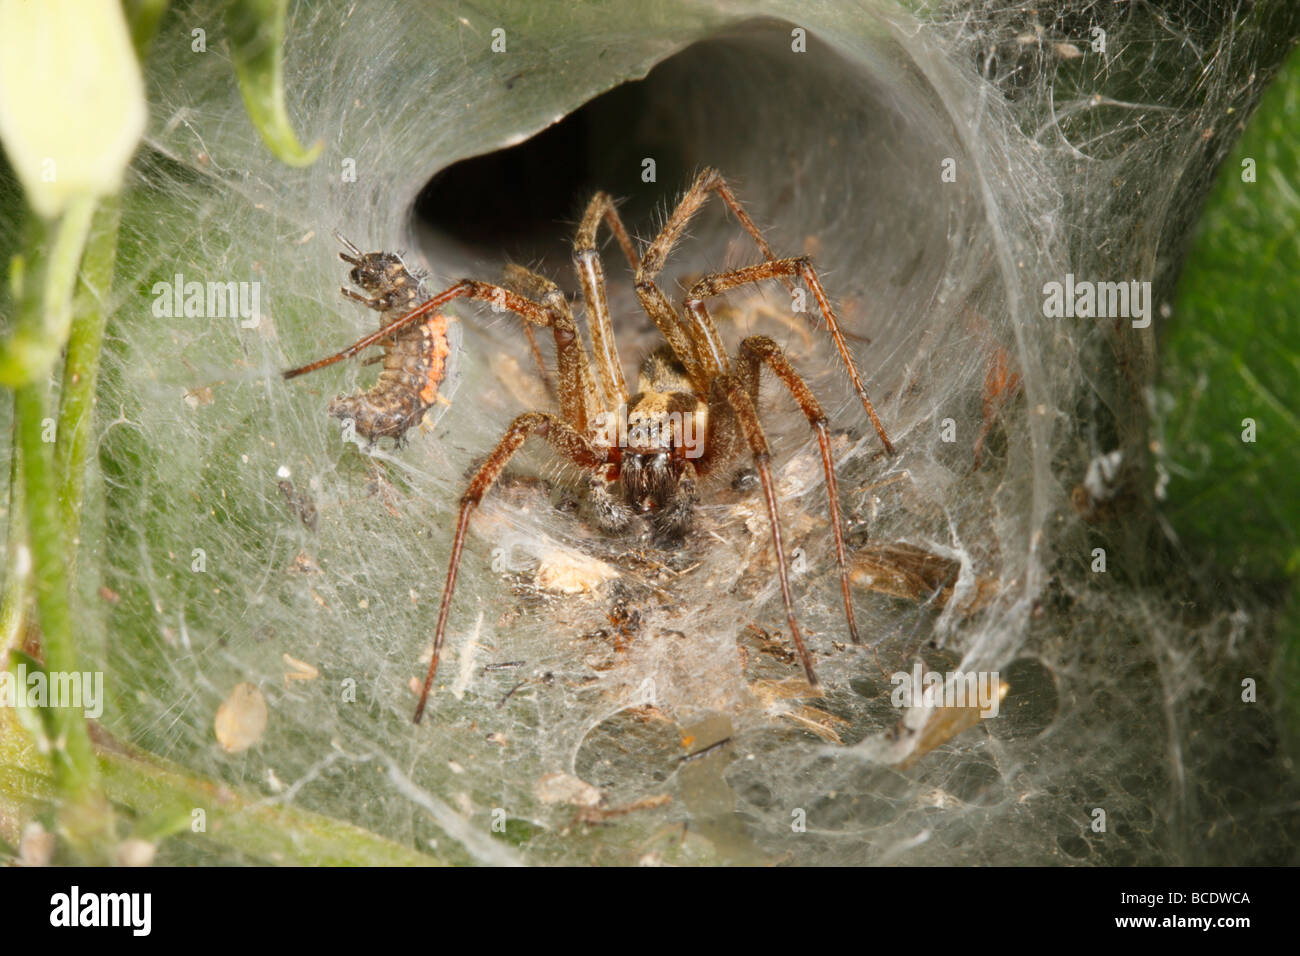 Labyrinth Spider approaching a ladybird Larva trapped in its web Stock Photo